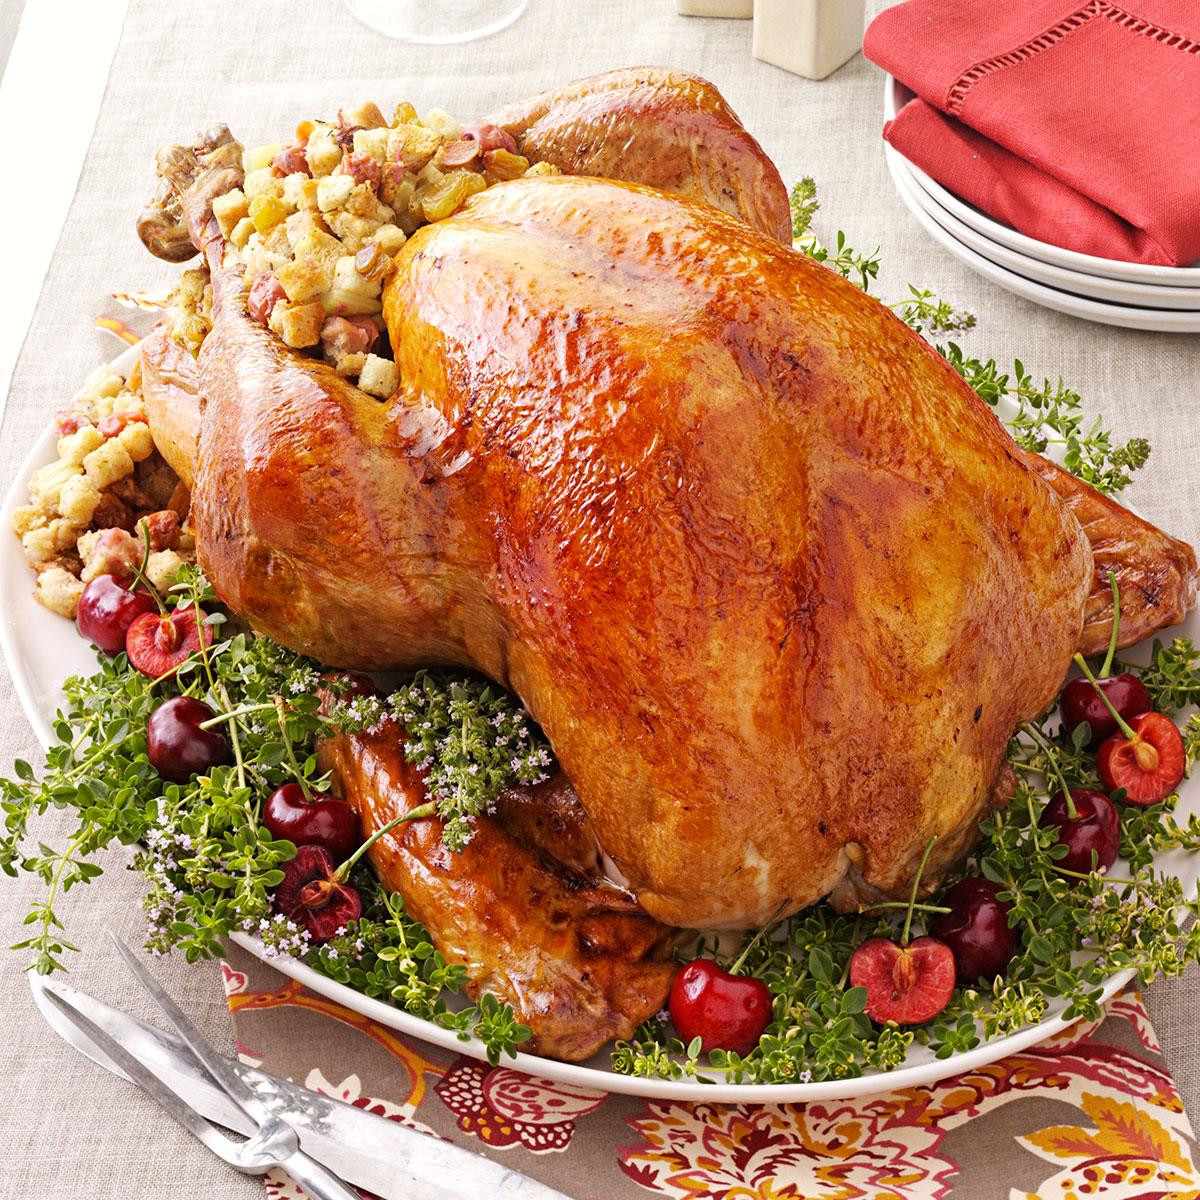 Thanksgiving Turkey Recipe With Stuffing
 Turkey with Cherry Stuffing Recipe